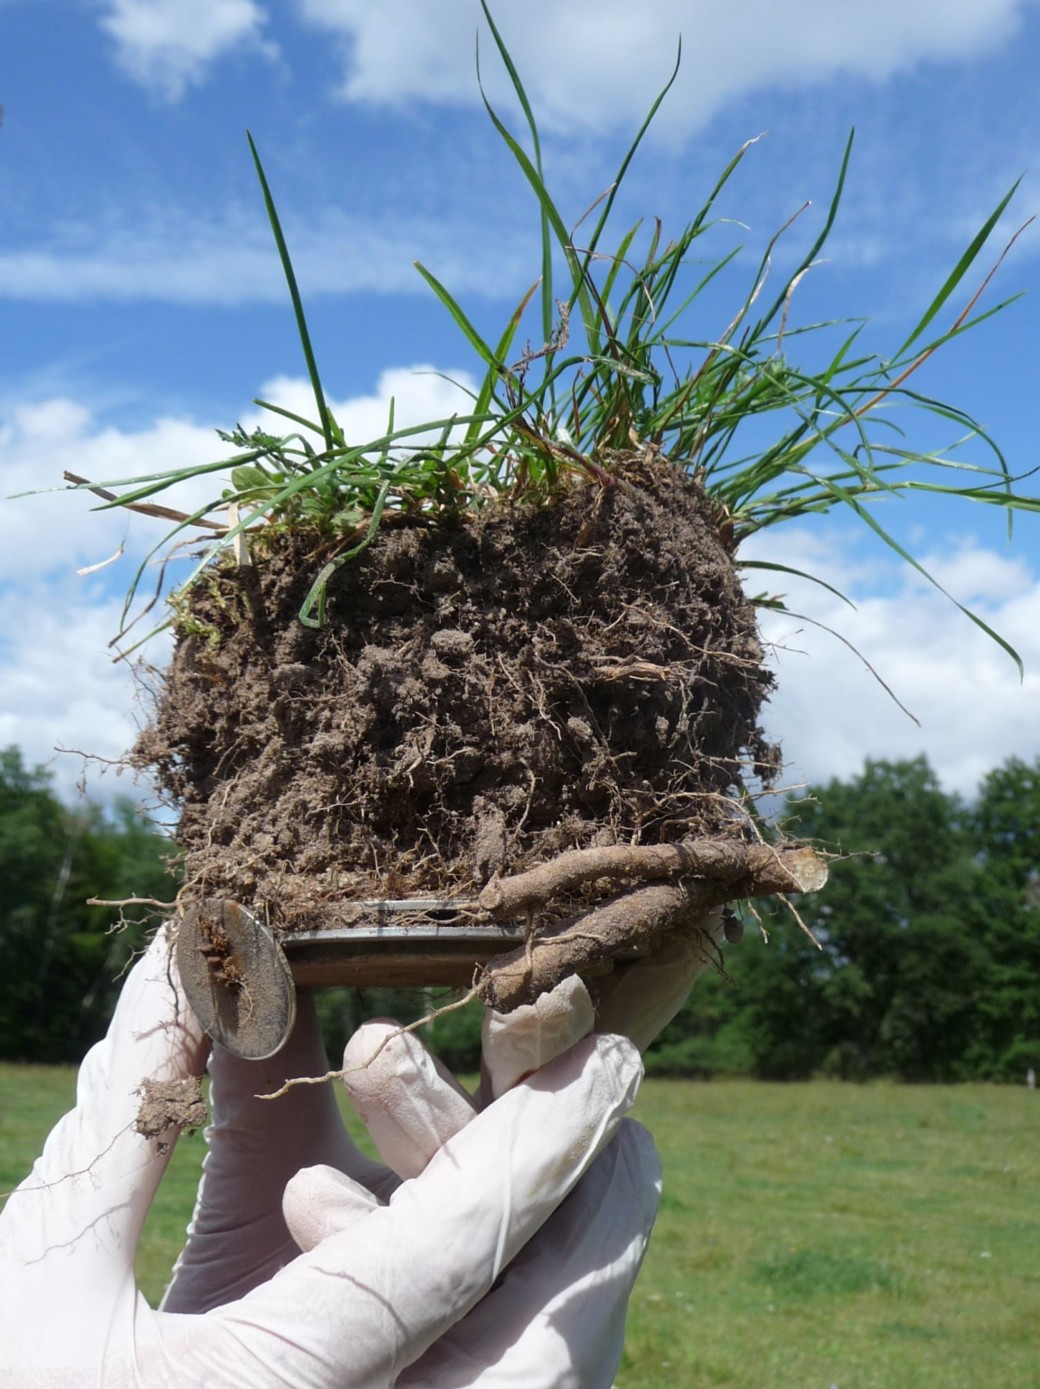 Picture: The photograph shows a piece of soil with grass growth lying on a round flat mineral container and held in front of the camera by two hands in white latex gloves. The size of the piece of soil is about twelve centimetres in height and about fifteen centimetres in diameter. Many predominantly fine roots can be seen in the soil. Long blades of grass grow on the surface of the piece of soil. In the background of the photograph a meadow and a row of leafy trees can be seen under a blue sky with a few clouds.